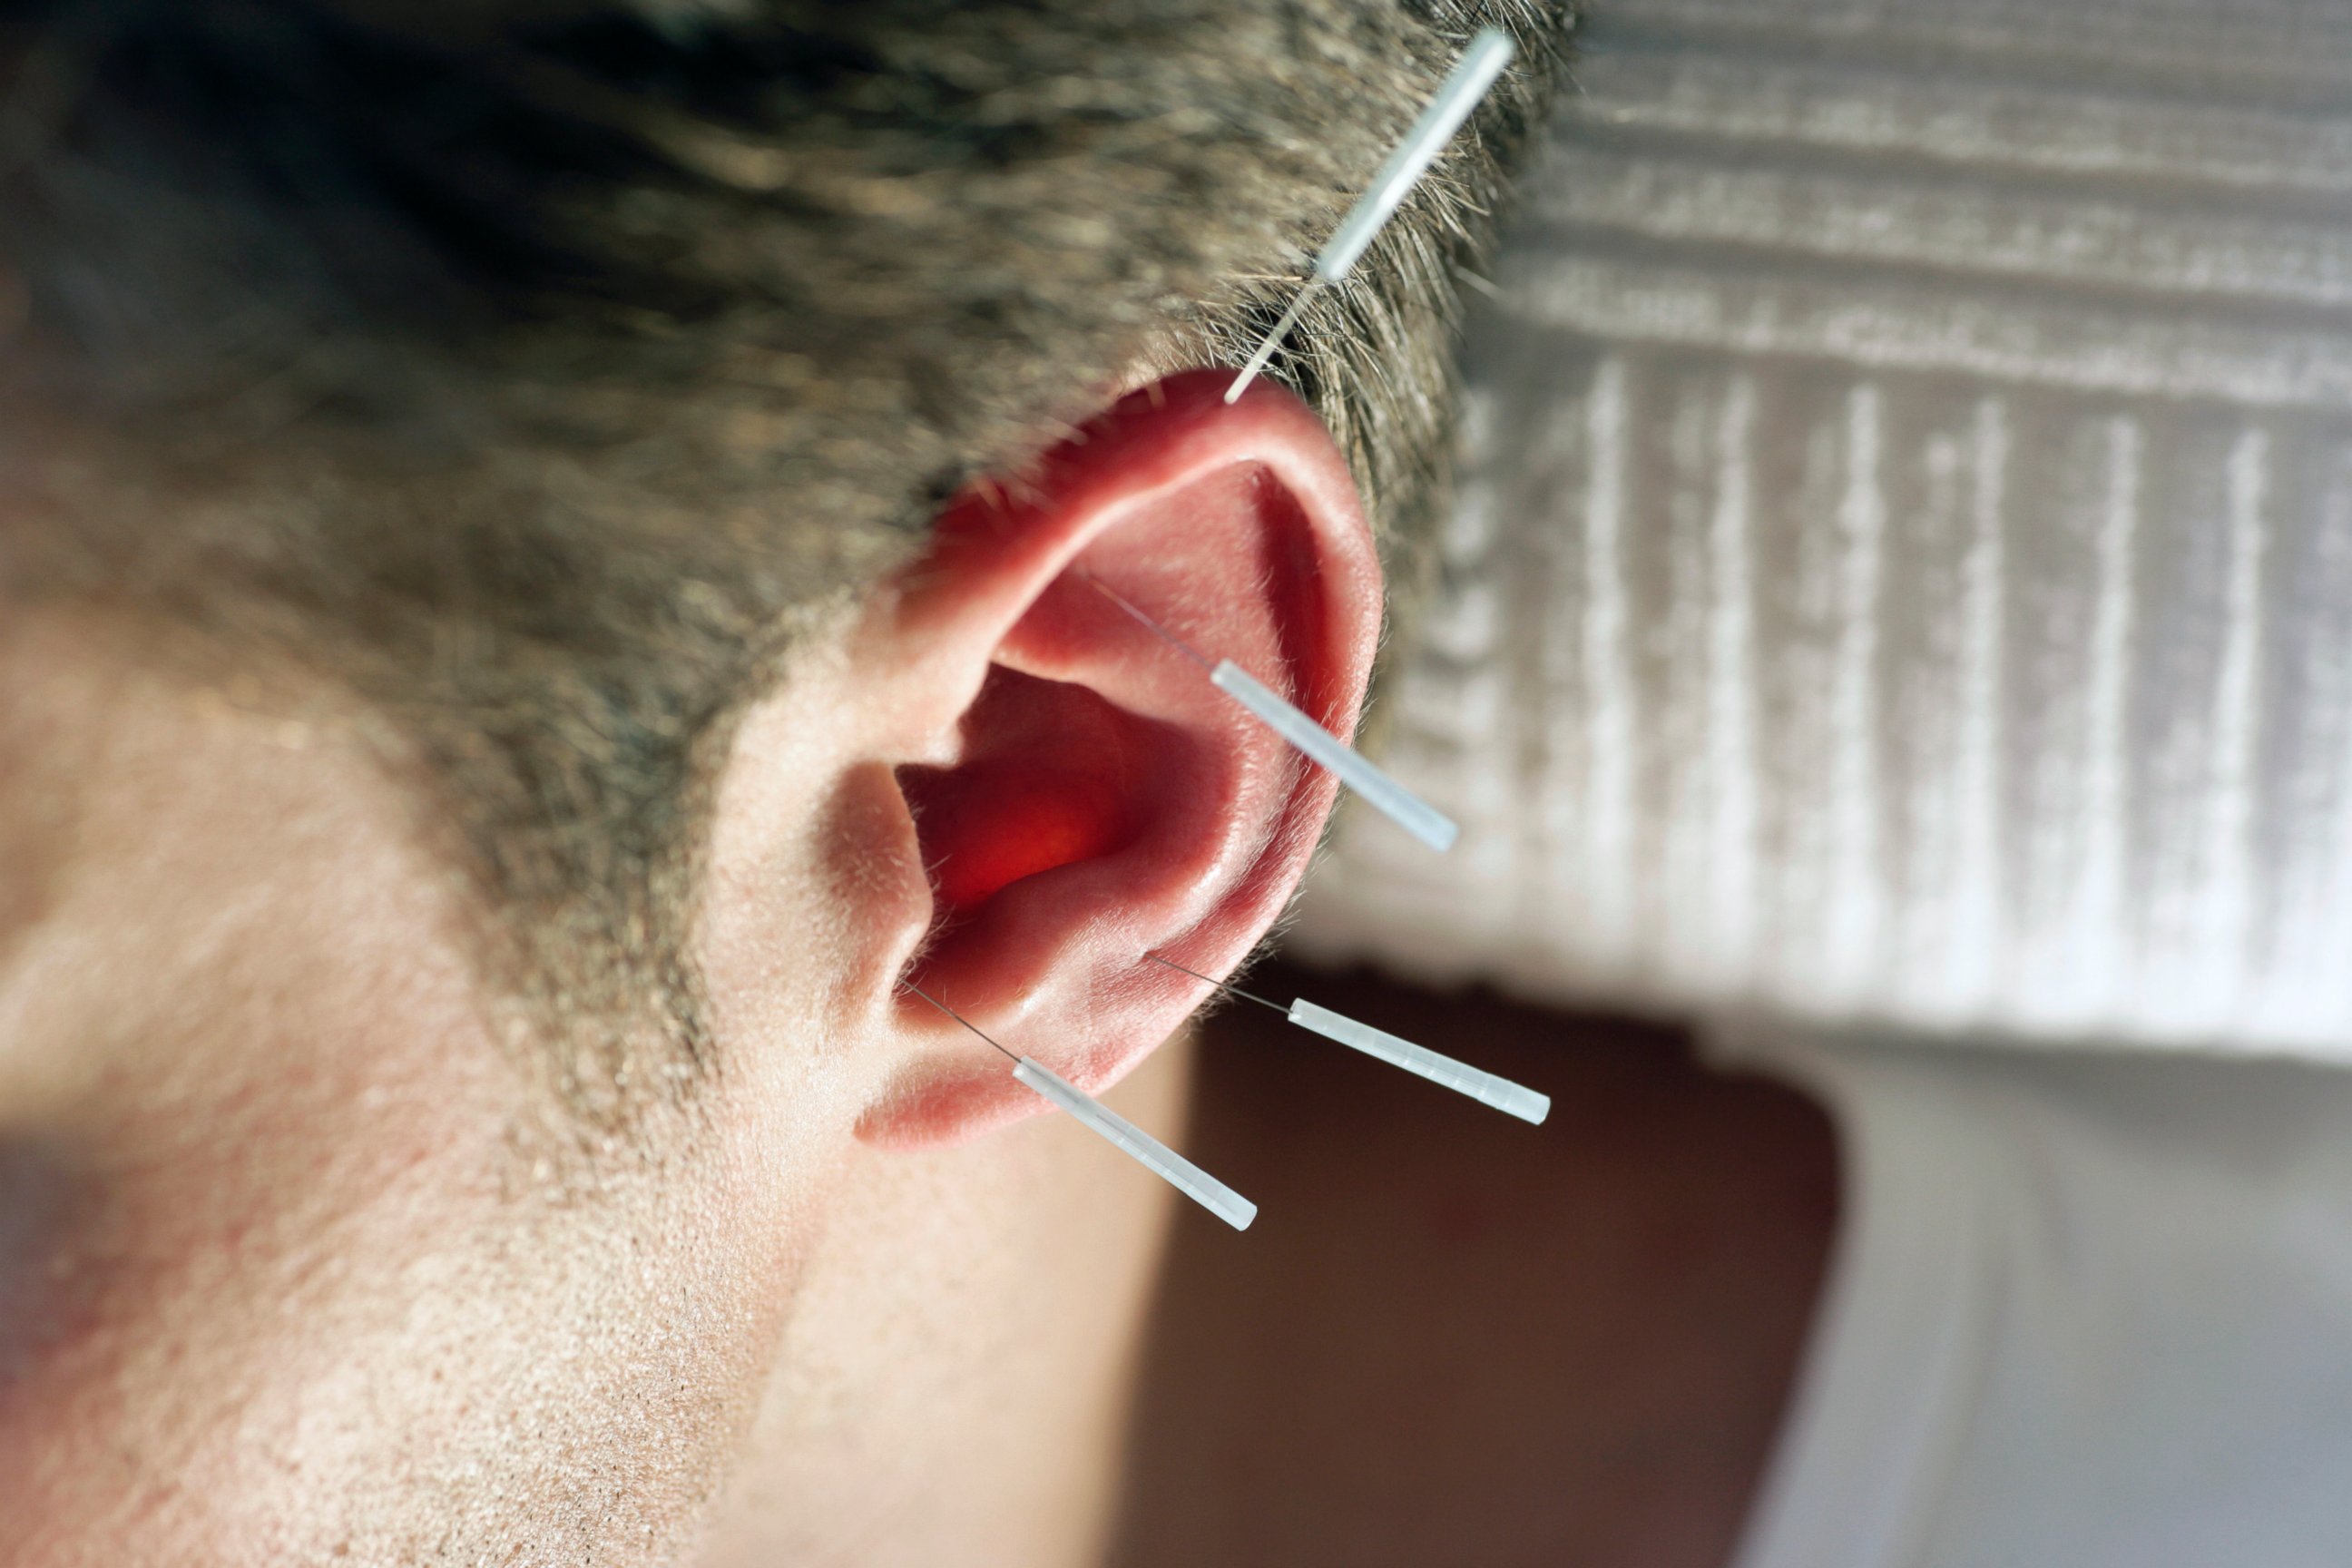 PHOTO: The military uses auricular acupuncture to treat pain on and off the battlefield.